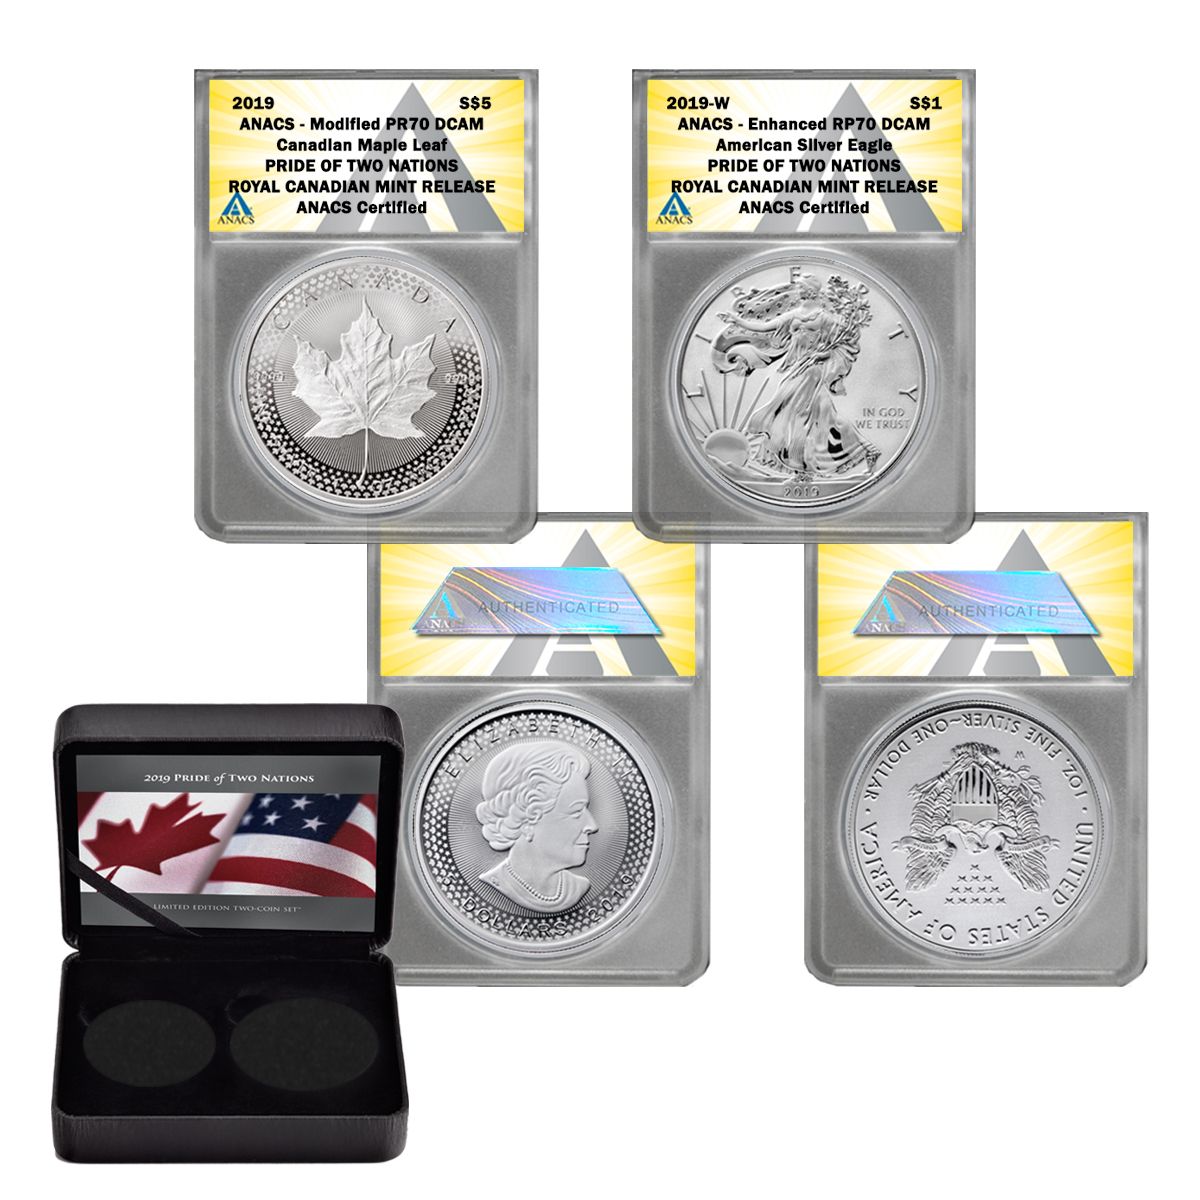 SILVER  EAGLE PRIDE OF TWO NATIONS SET TWO COIN SET 2019 W  NGC 70/70 